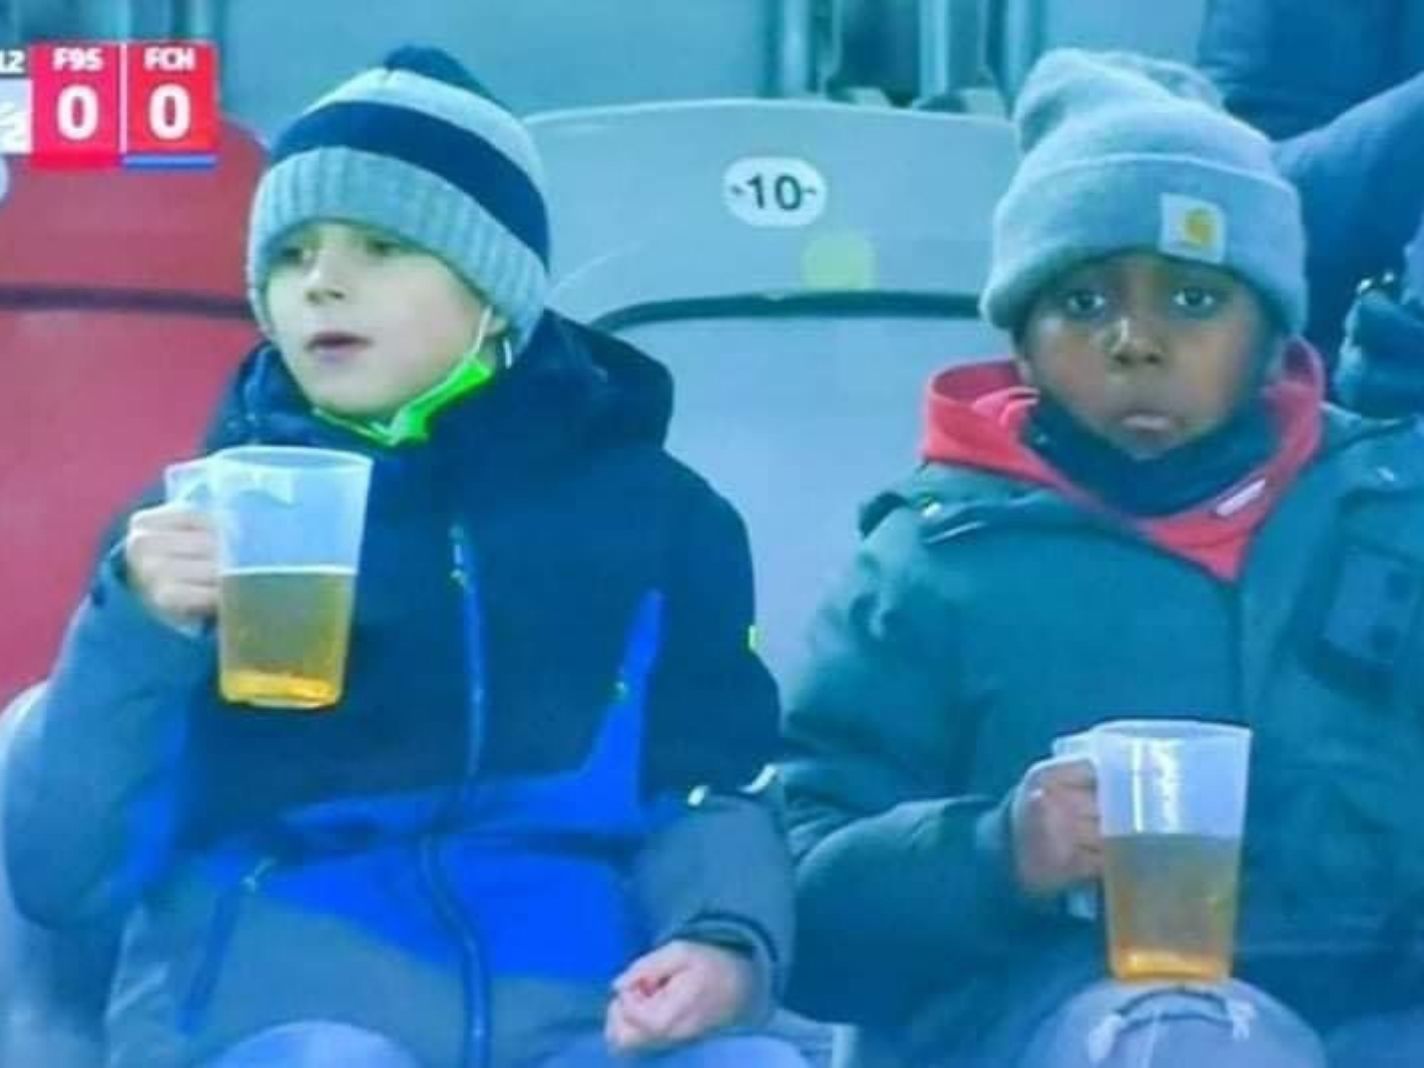 Young football fans spotted drinking beer in Germany? – Here’s the truth behind viral photo